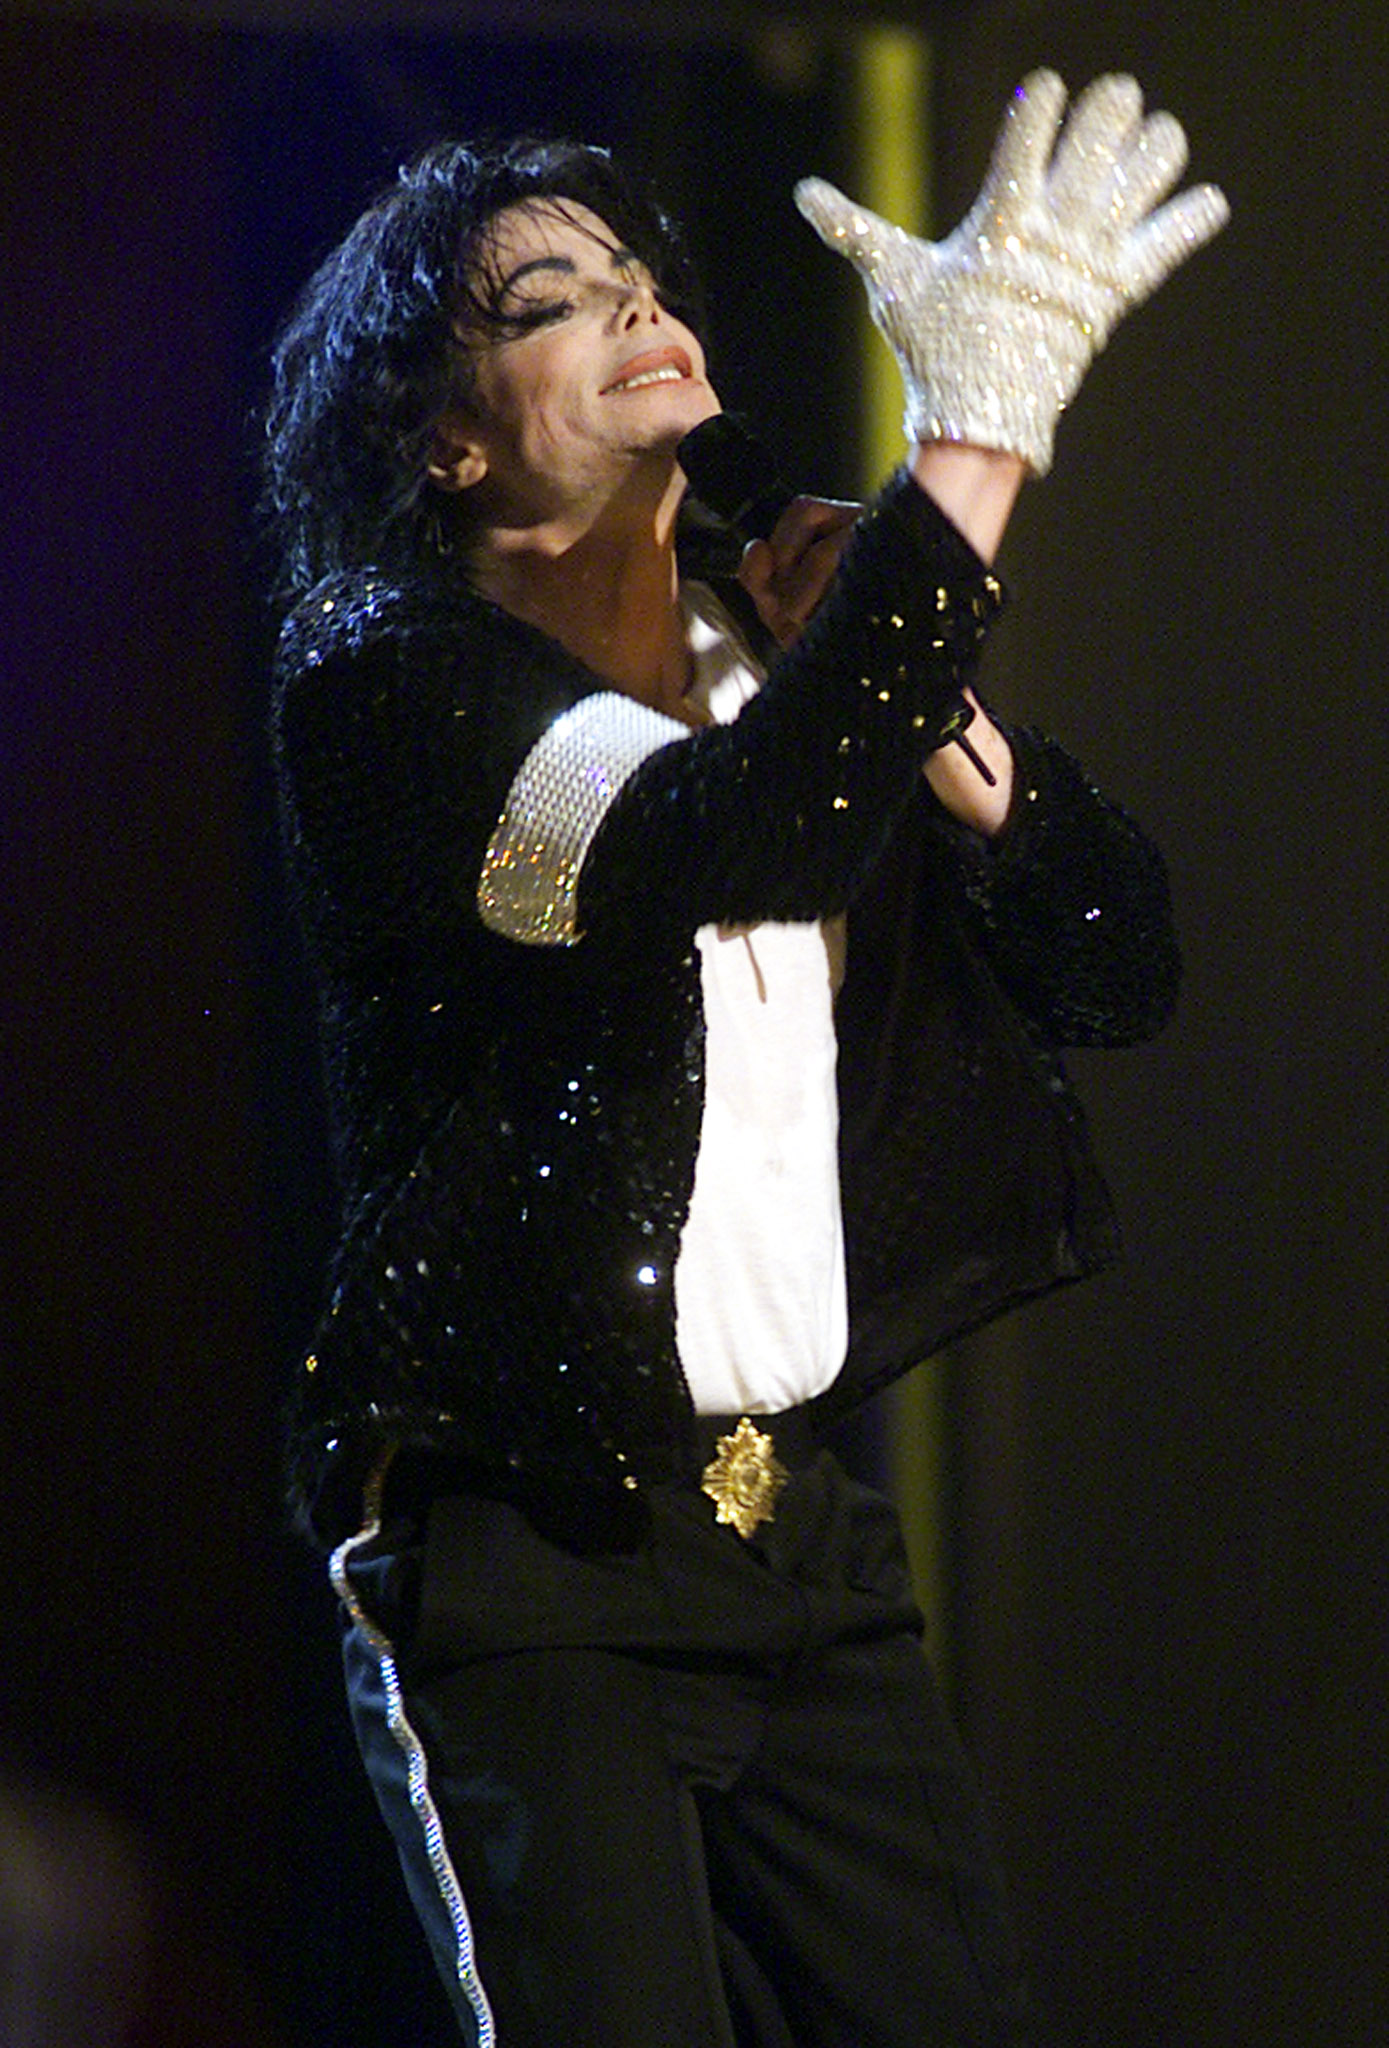 Michael Jackson sports a white glove during a first concert at Madison Square Garden on September 7, 2001 in New York City | Source: Getty Images